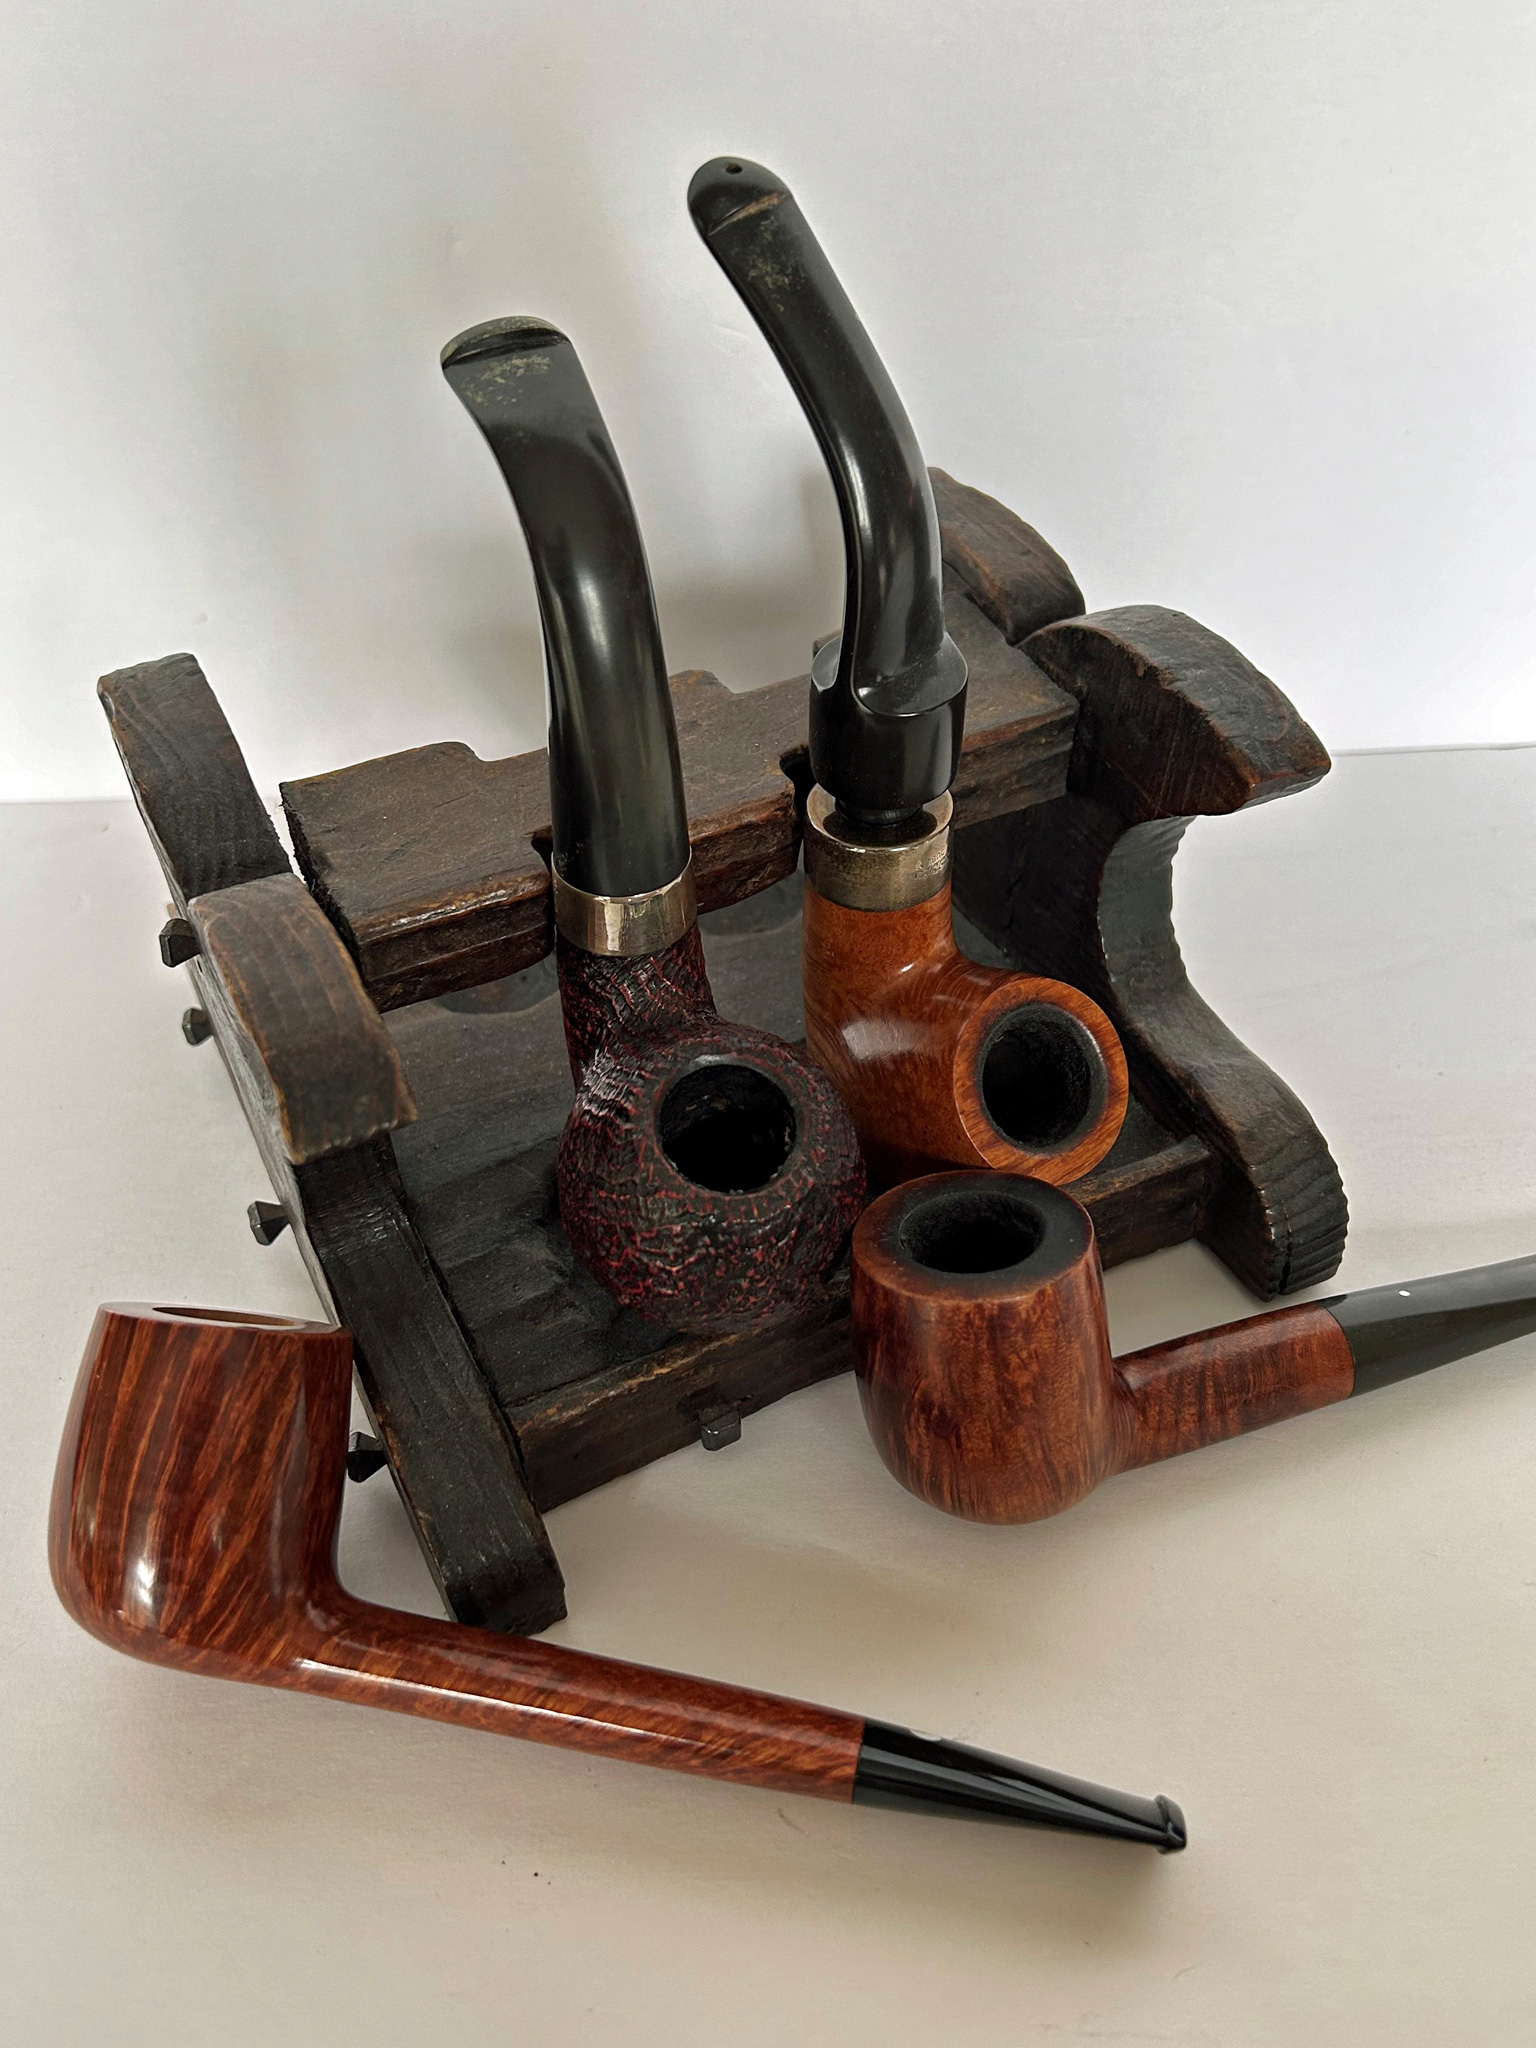 Some pipes cleaned and ready to go in search of wildflowers. Bottom left: A Cavicchi; bottom right: White Dot; top left to right: veteran Petersons (Photo: Fred Brown)